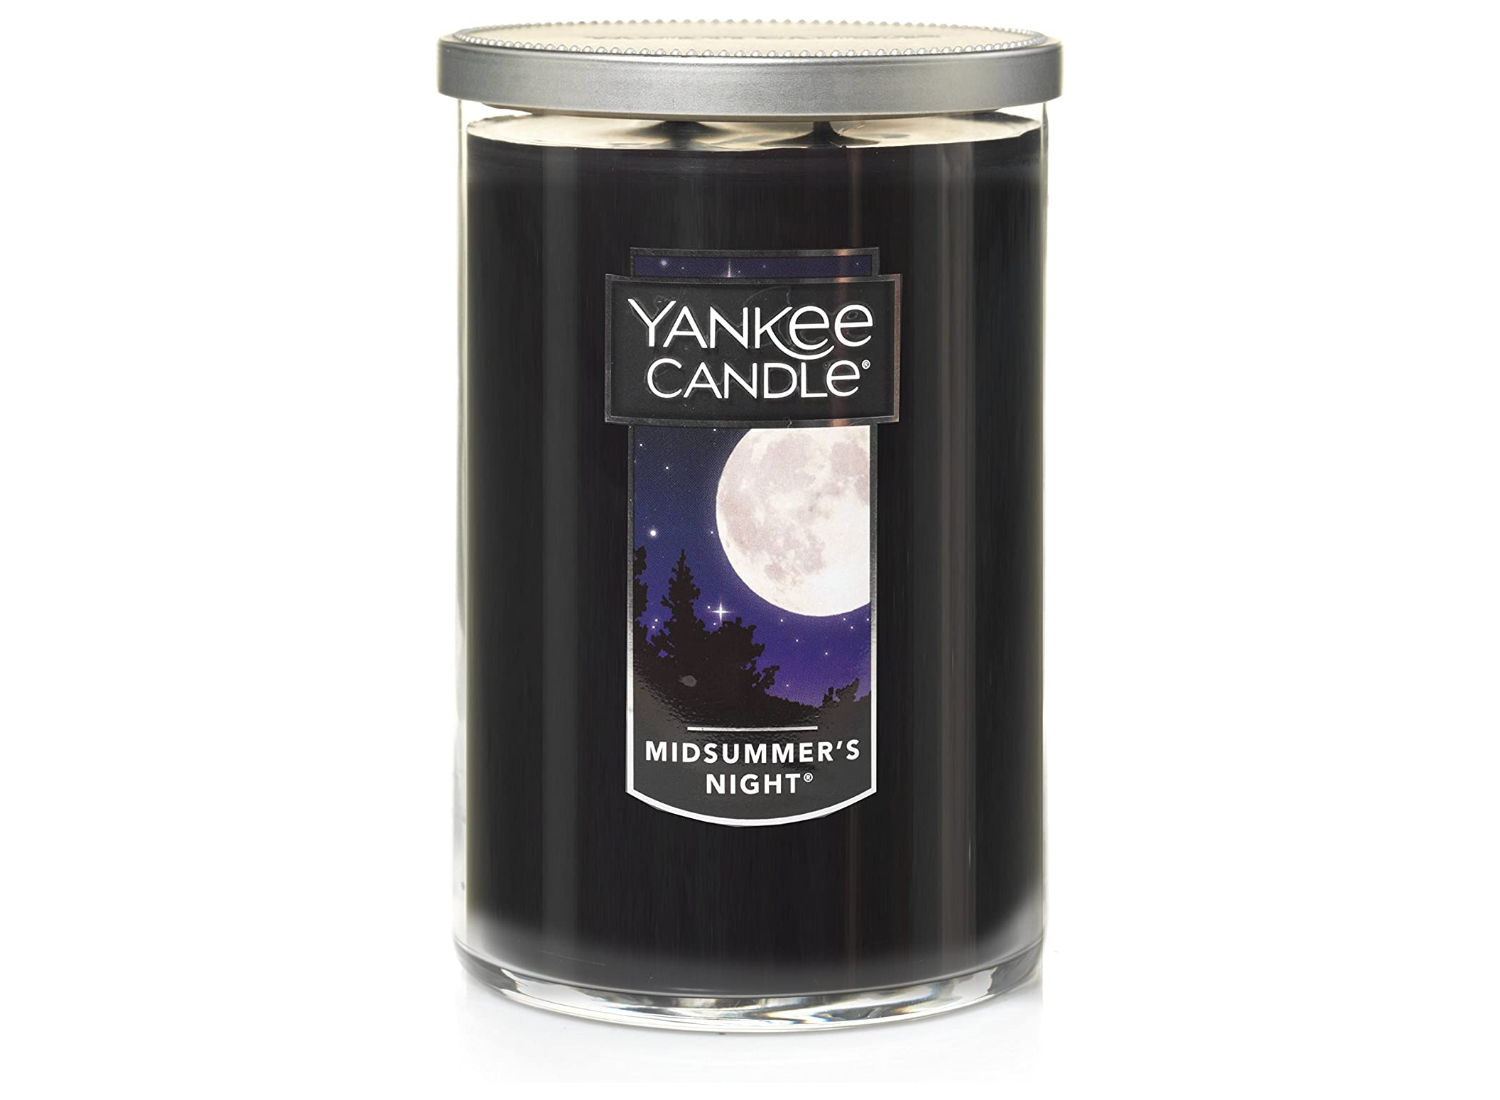 A Midsummer's Night Yankee Candle.